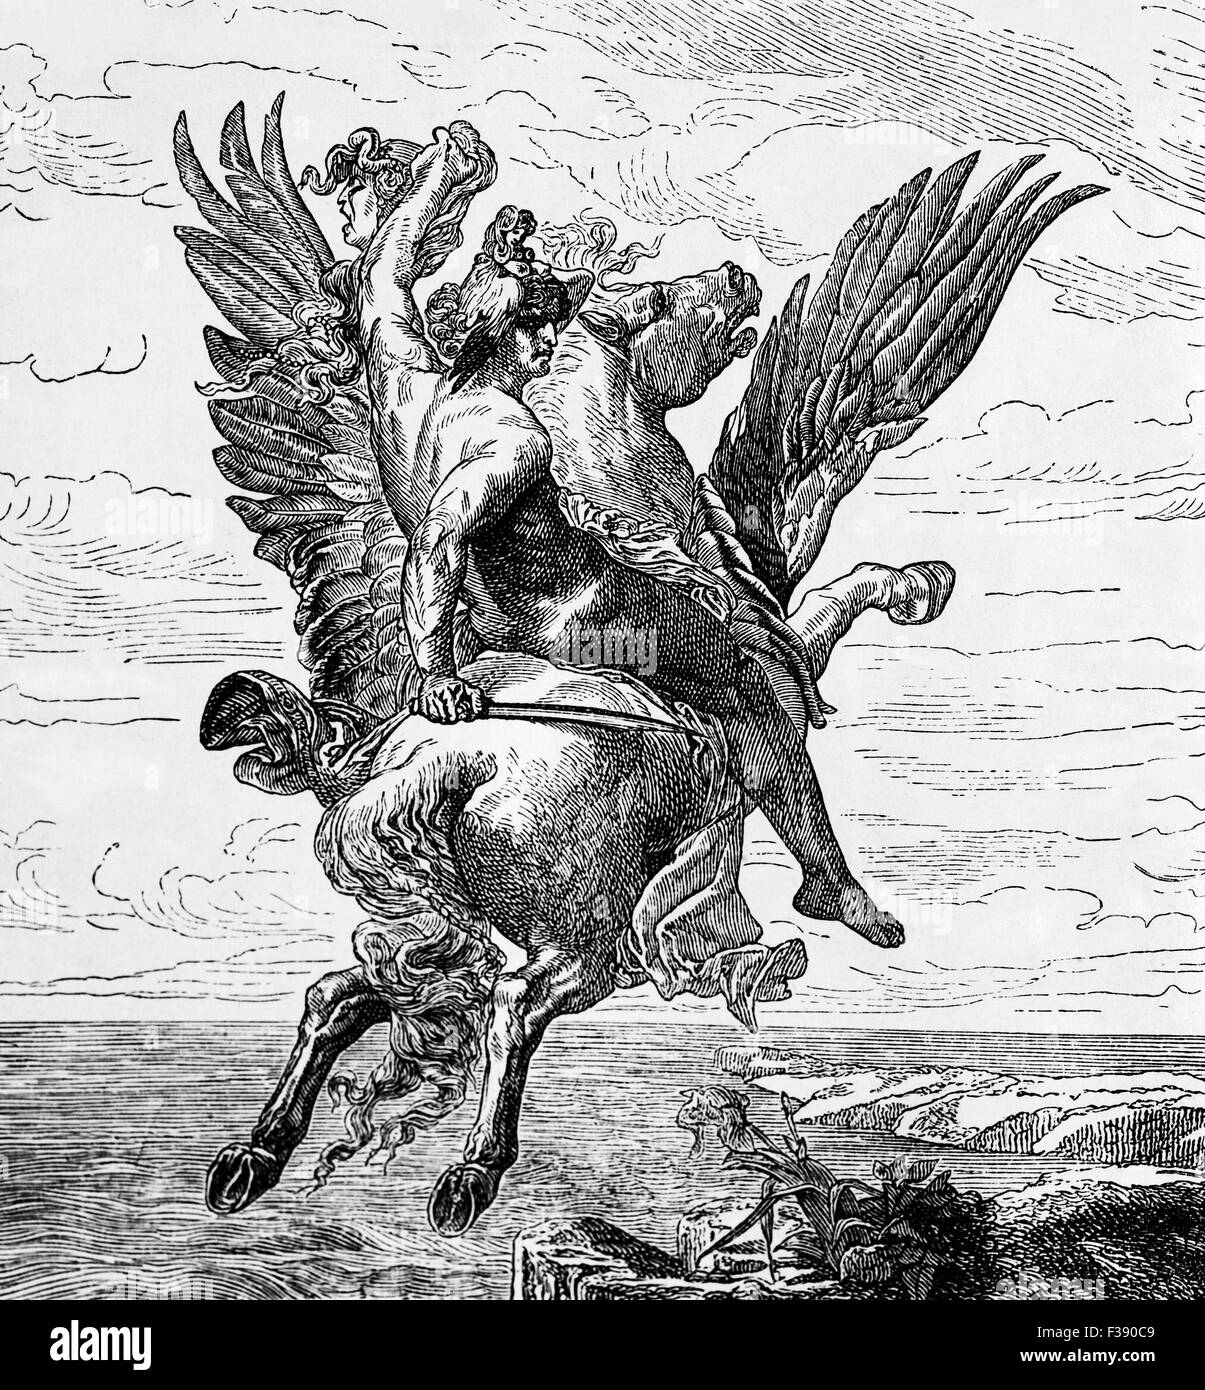 Perseus Clutching Medusa's Head after decapitating her , While Riding the Winged Horse Pagasus. Stock Photo